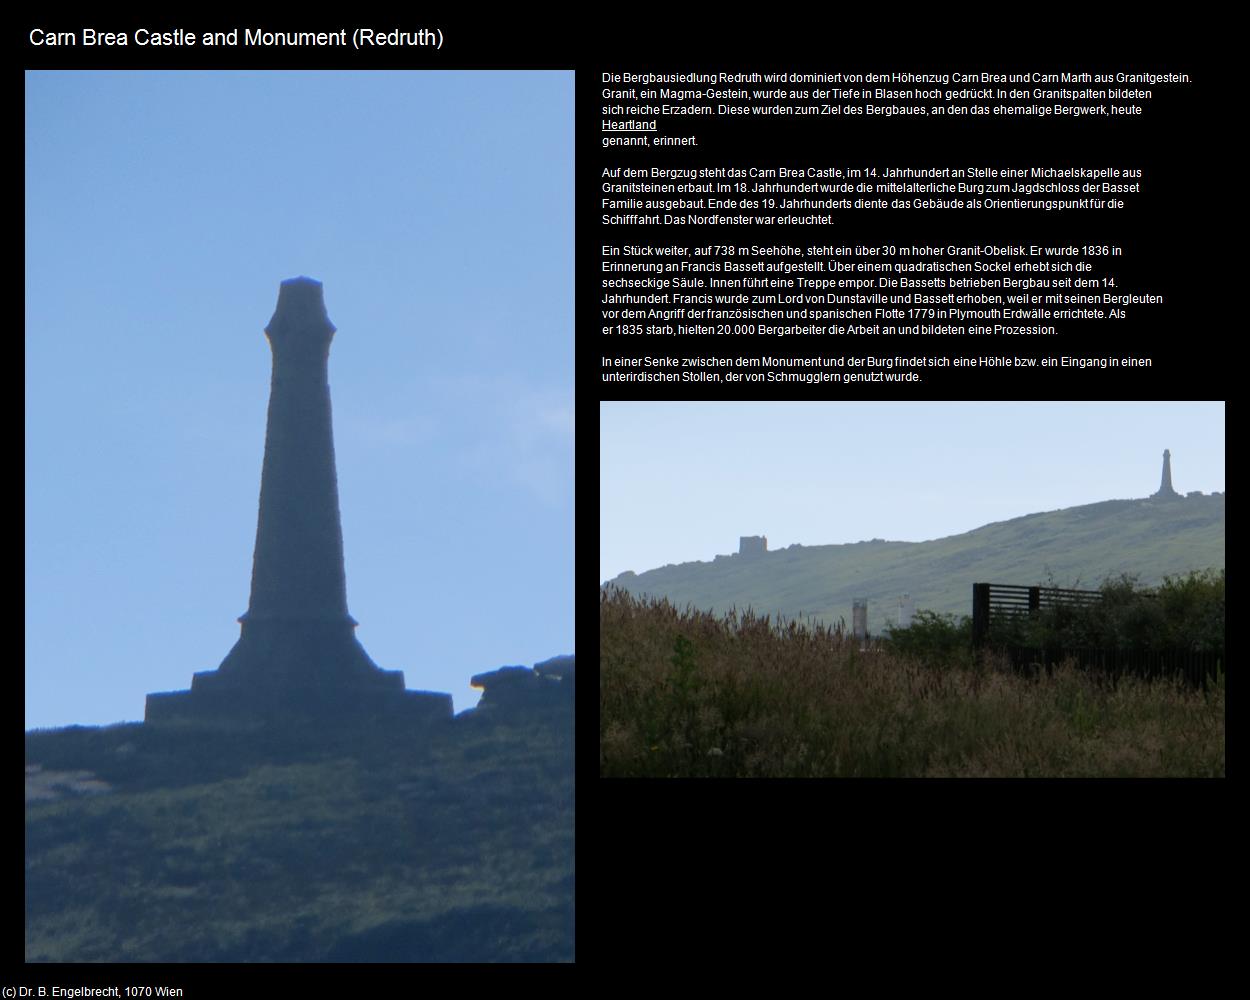 Carn Brea Castle and Monument (Redruth, England) in Kulturatlas-ENGLAND und WALES(c)B.Engelbrecht